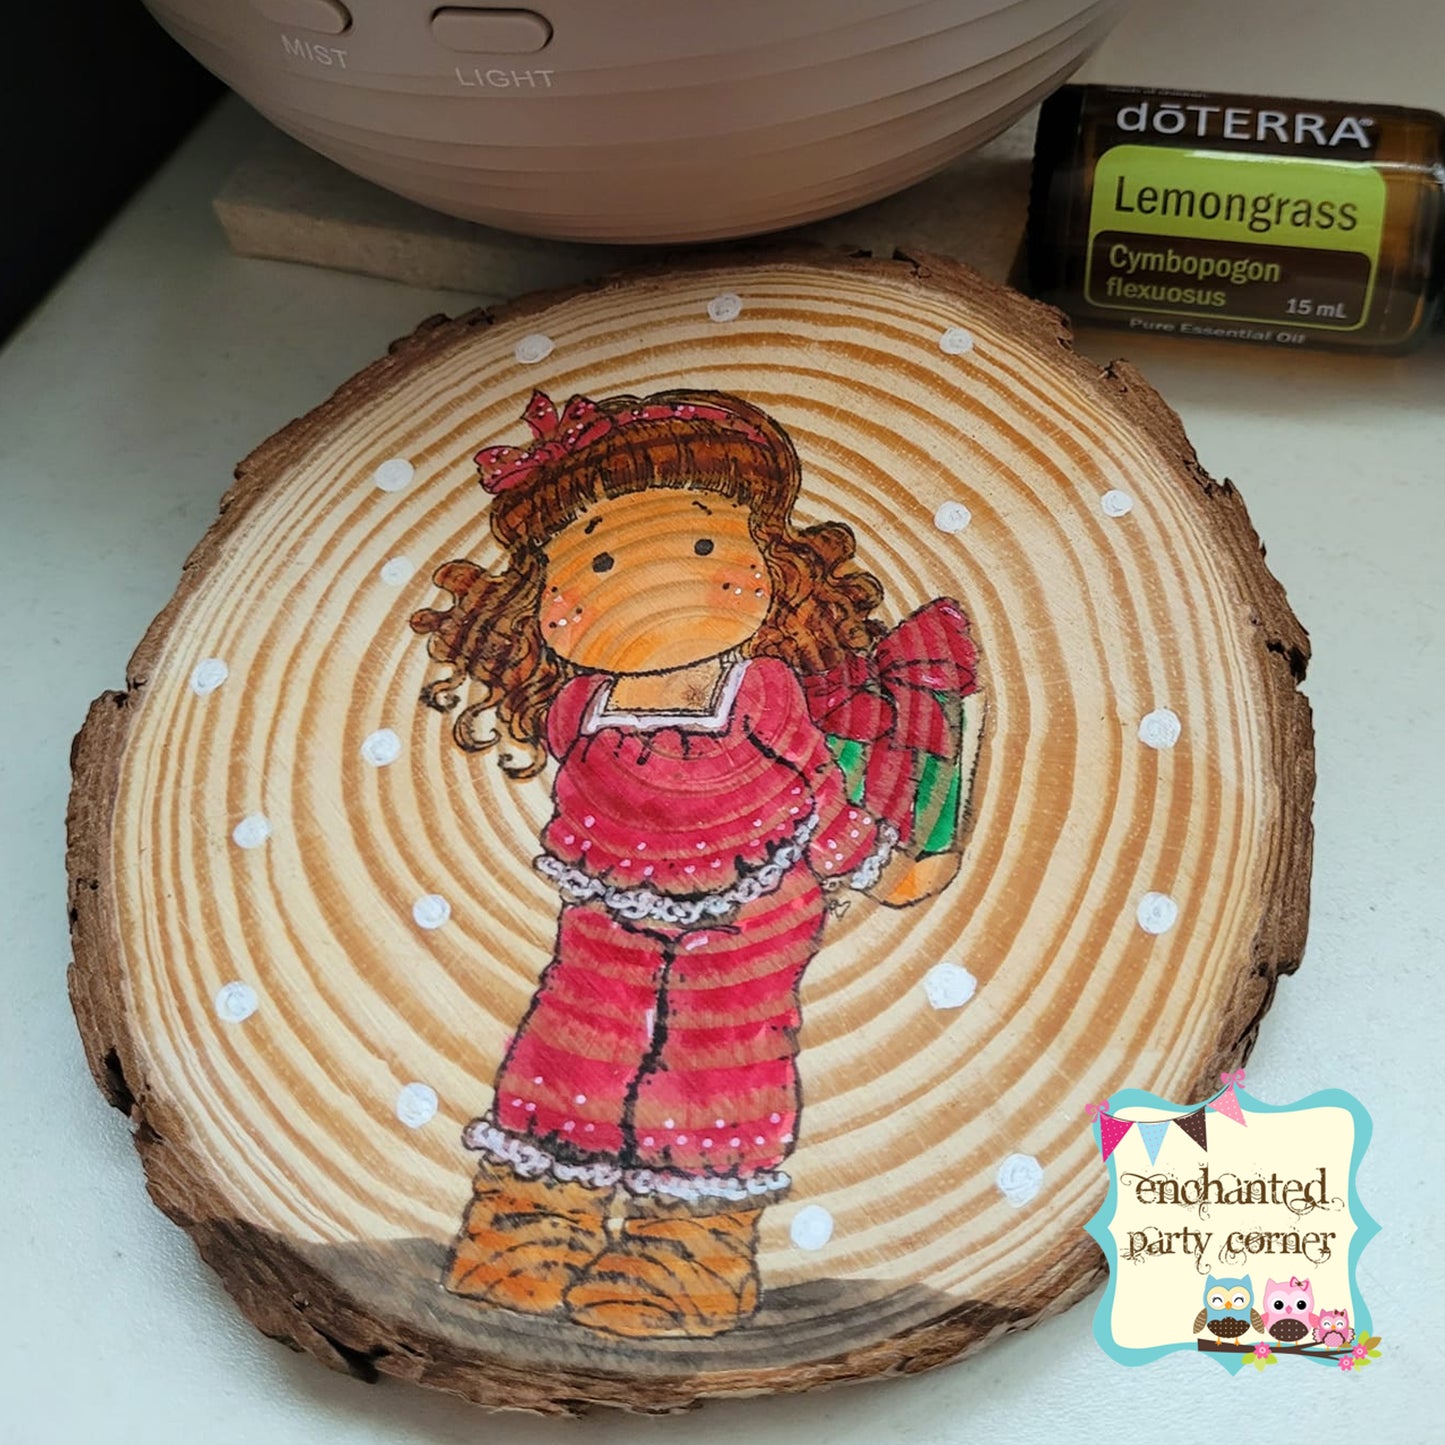 Wooden Coaster Painting Workshops